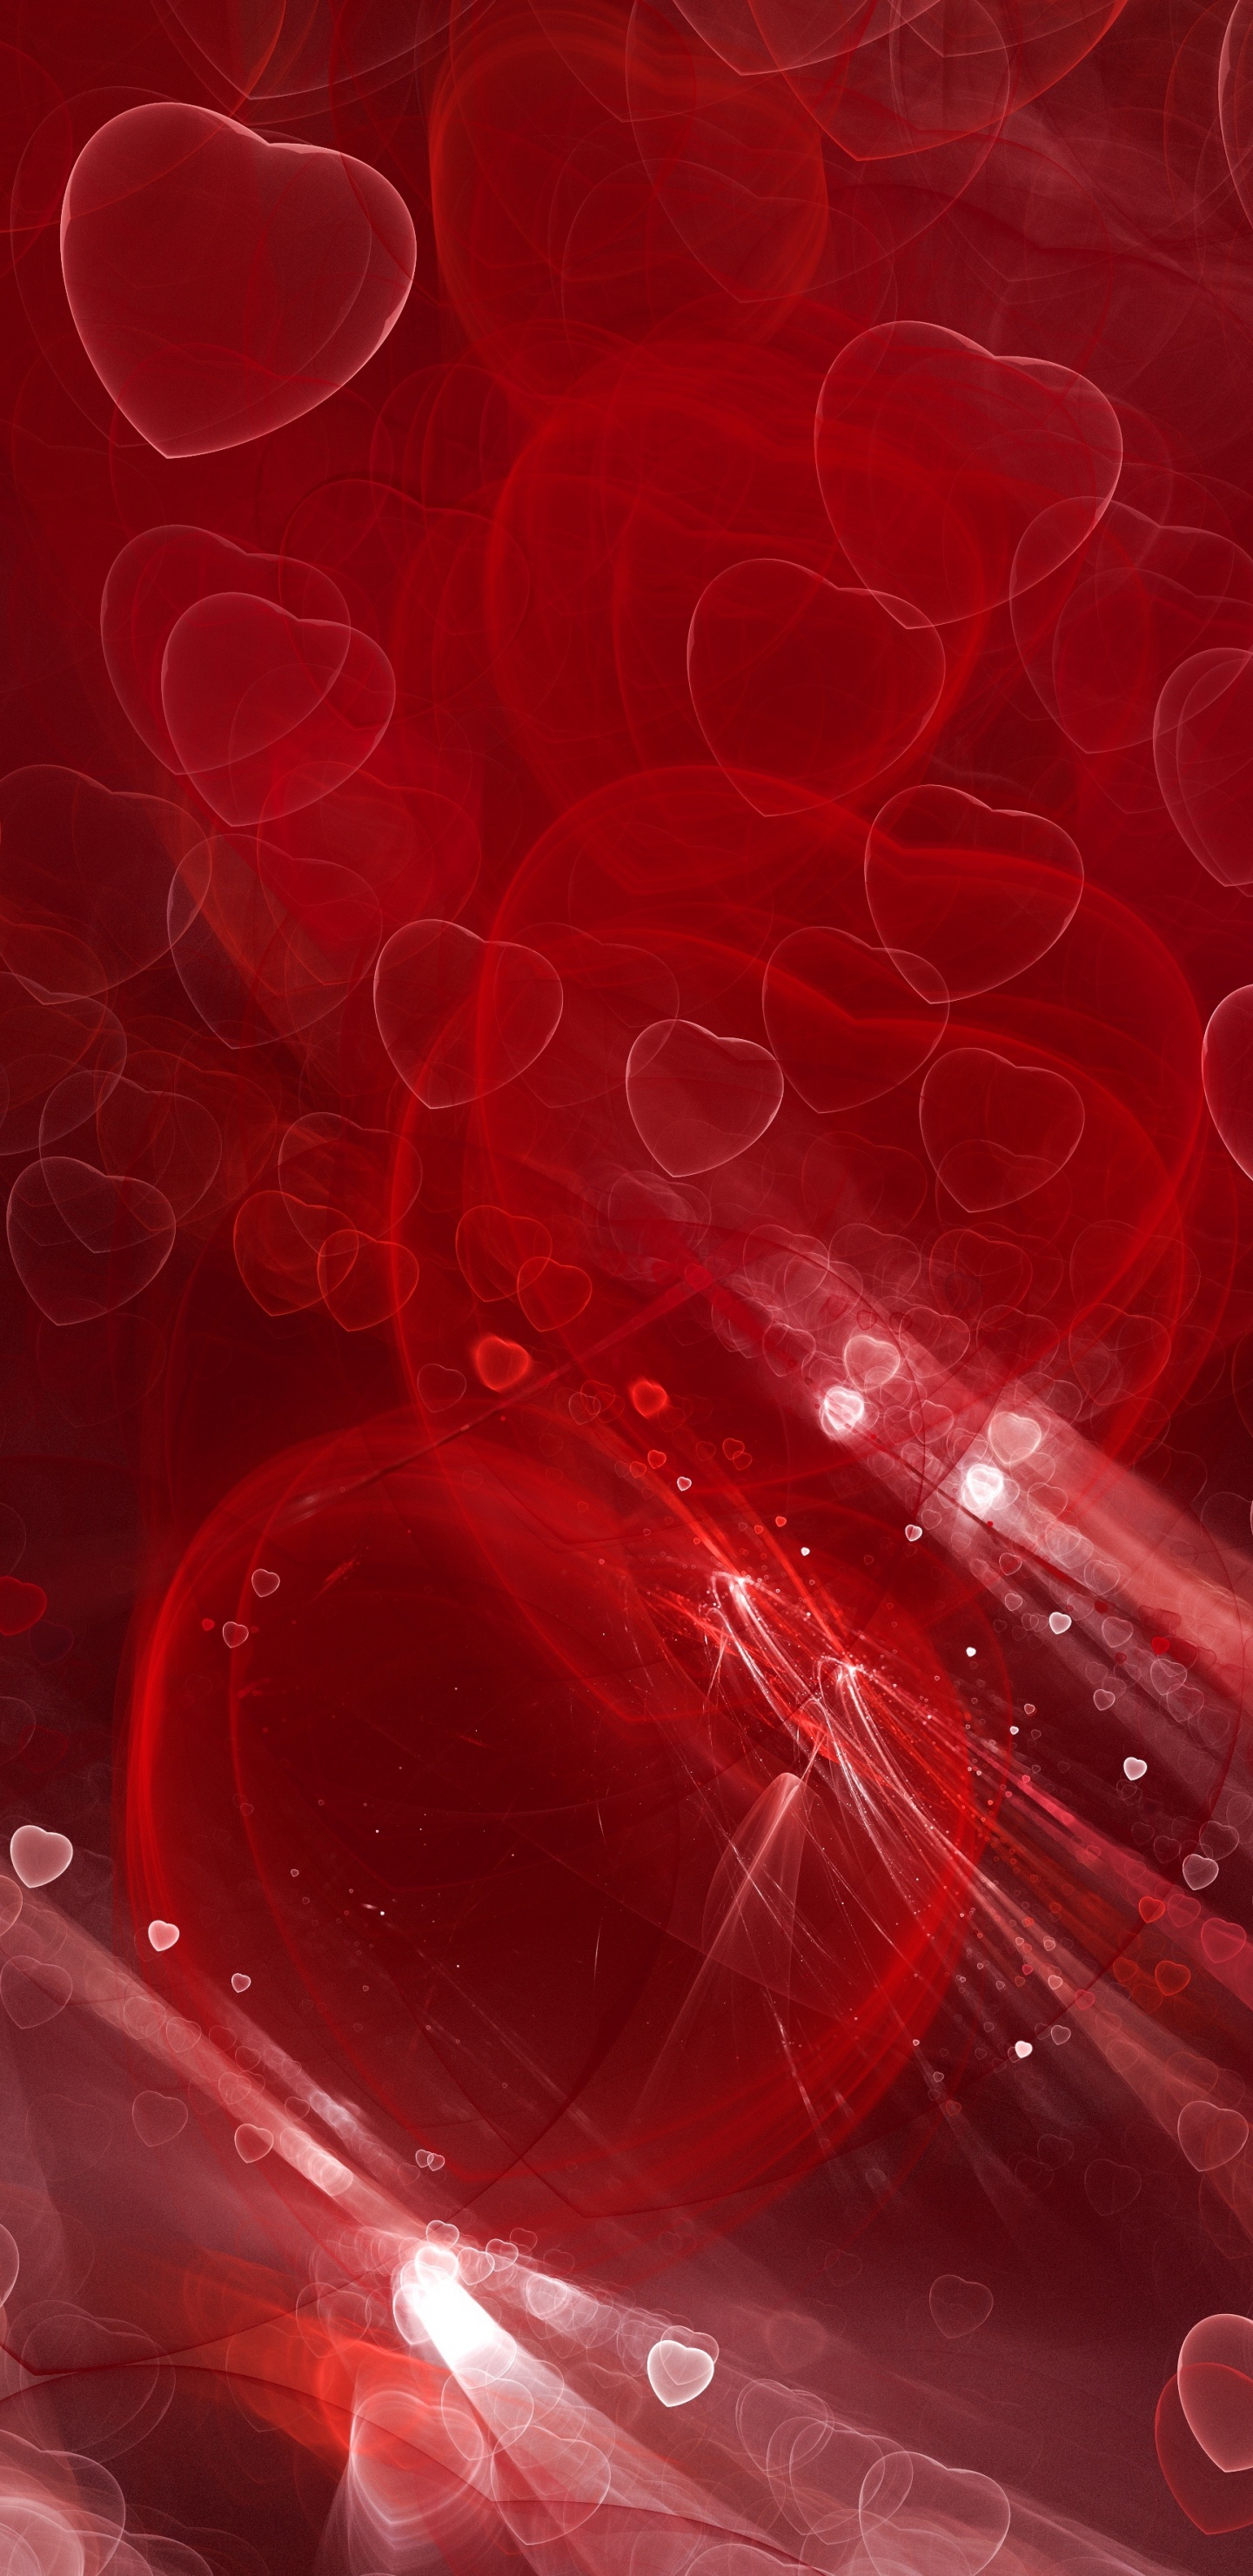 Fractal, Red, Pink, Heart, Maroon. Wallpaper in 1440x2960 Resolution